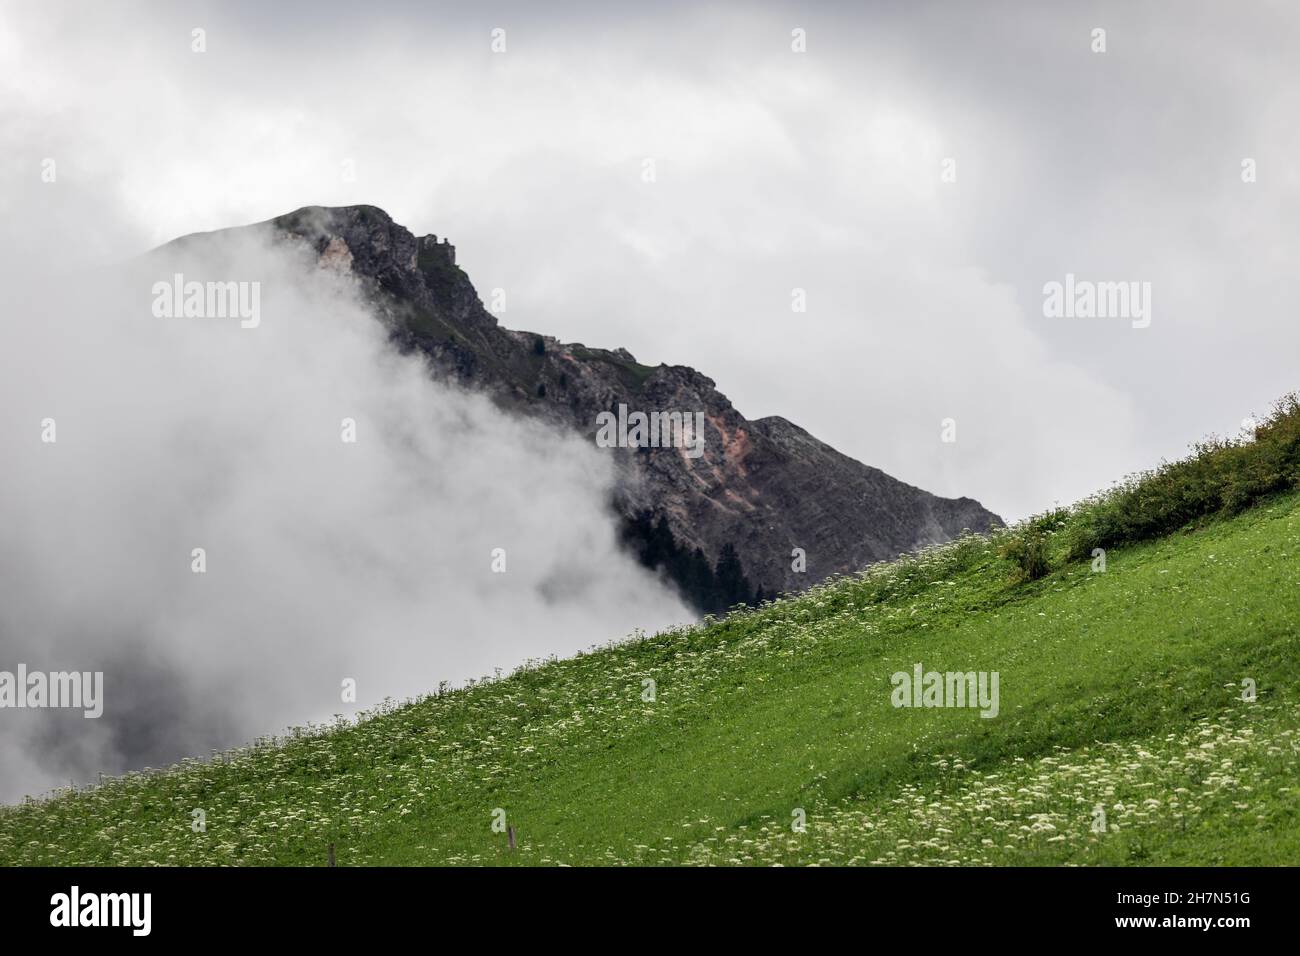 Alpine hill covered with fresh green grass on a foggy day Stock Photo